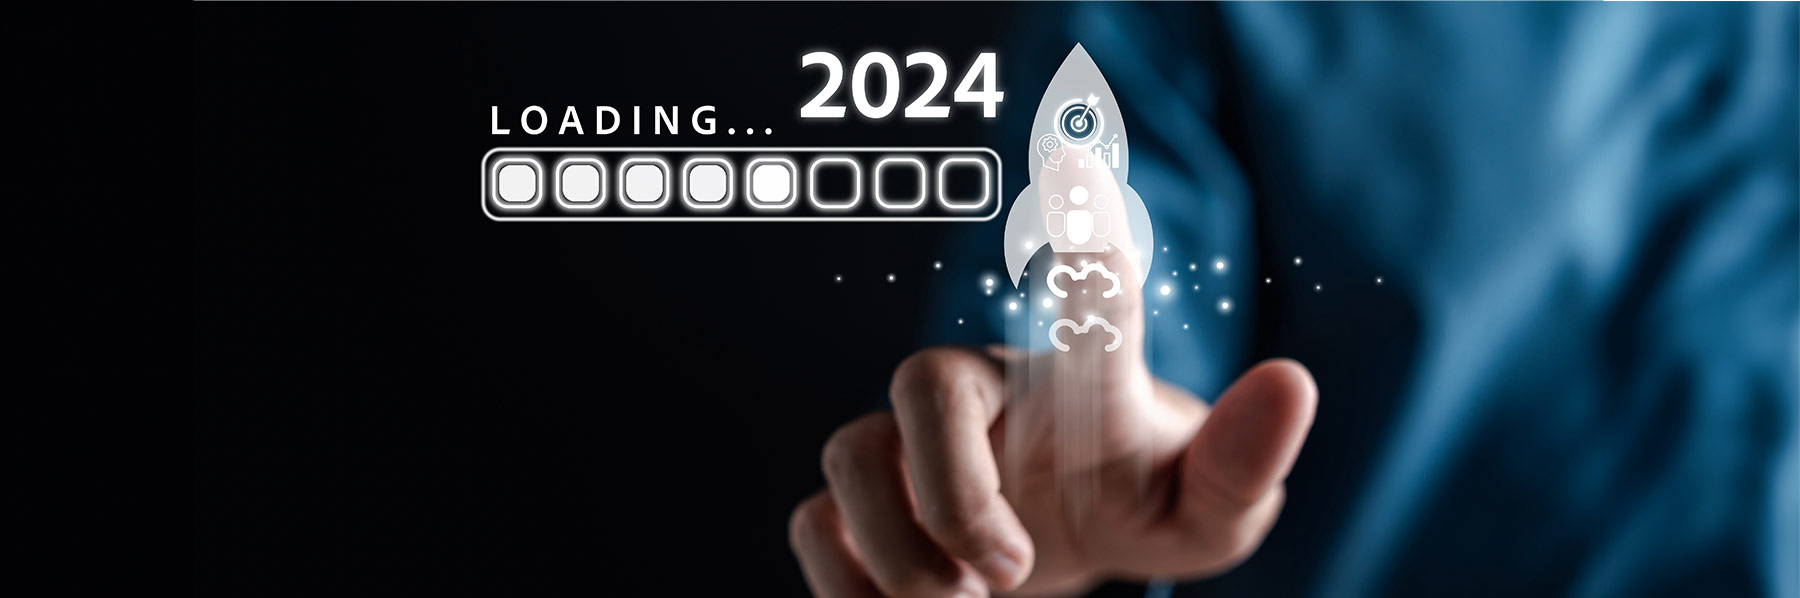 5 supply chain planning trends shaping 2024